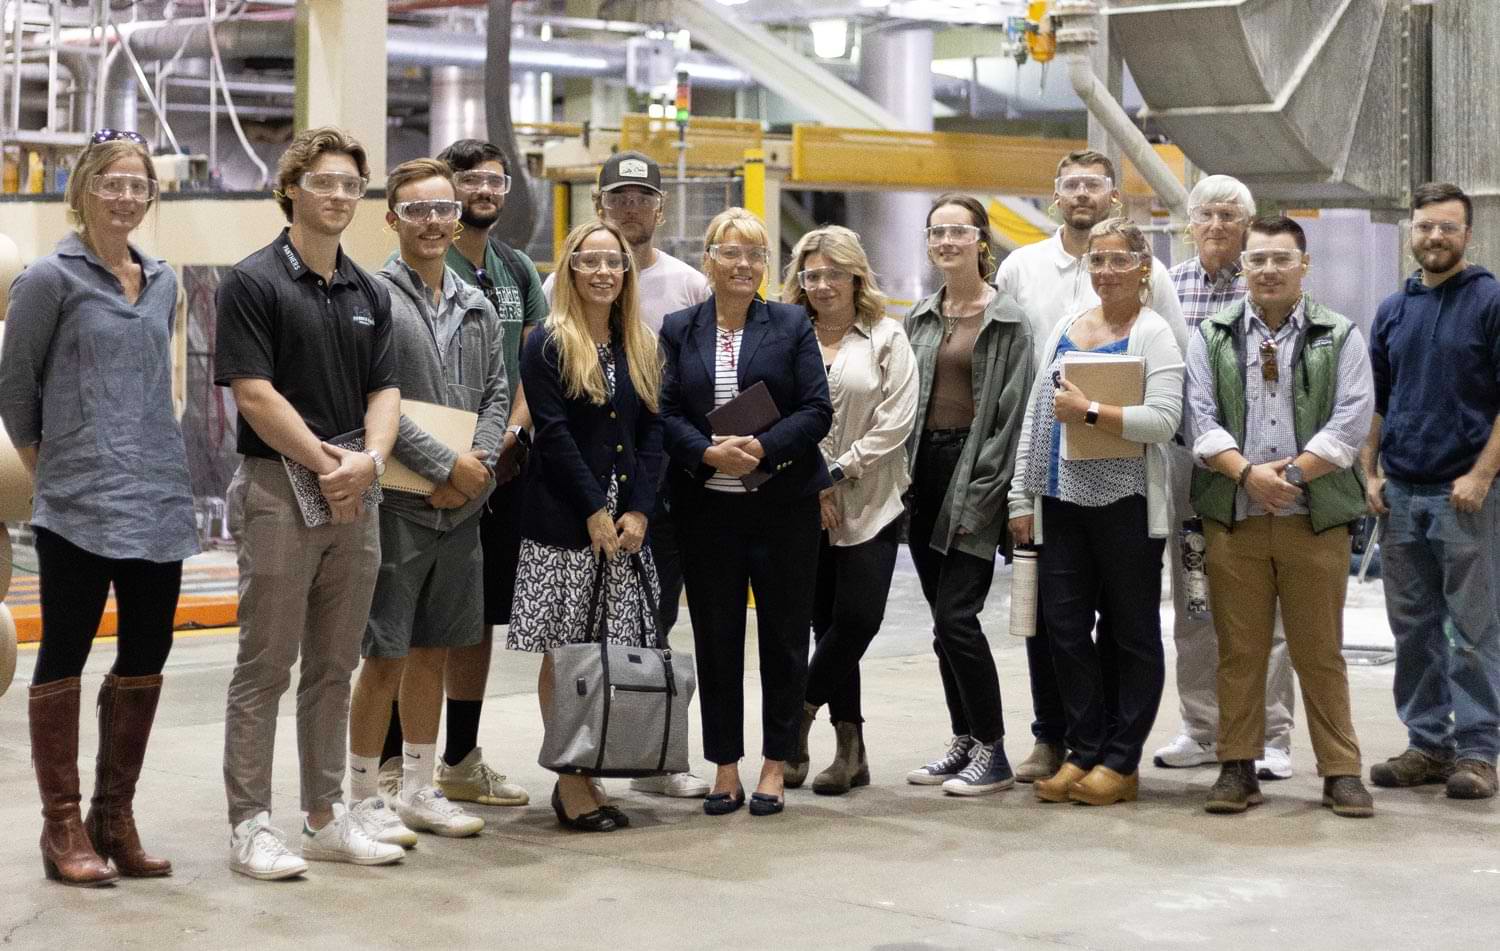 Professor Chantalle Forgues and students across various disciplines photographed at White Mountain Paper Company (WMPC) in Gorham, New Hampshire